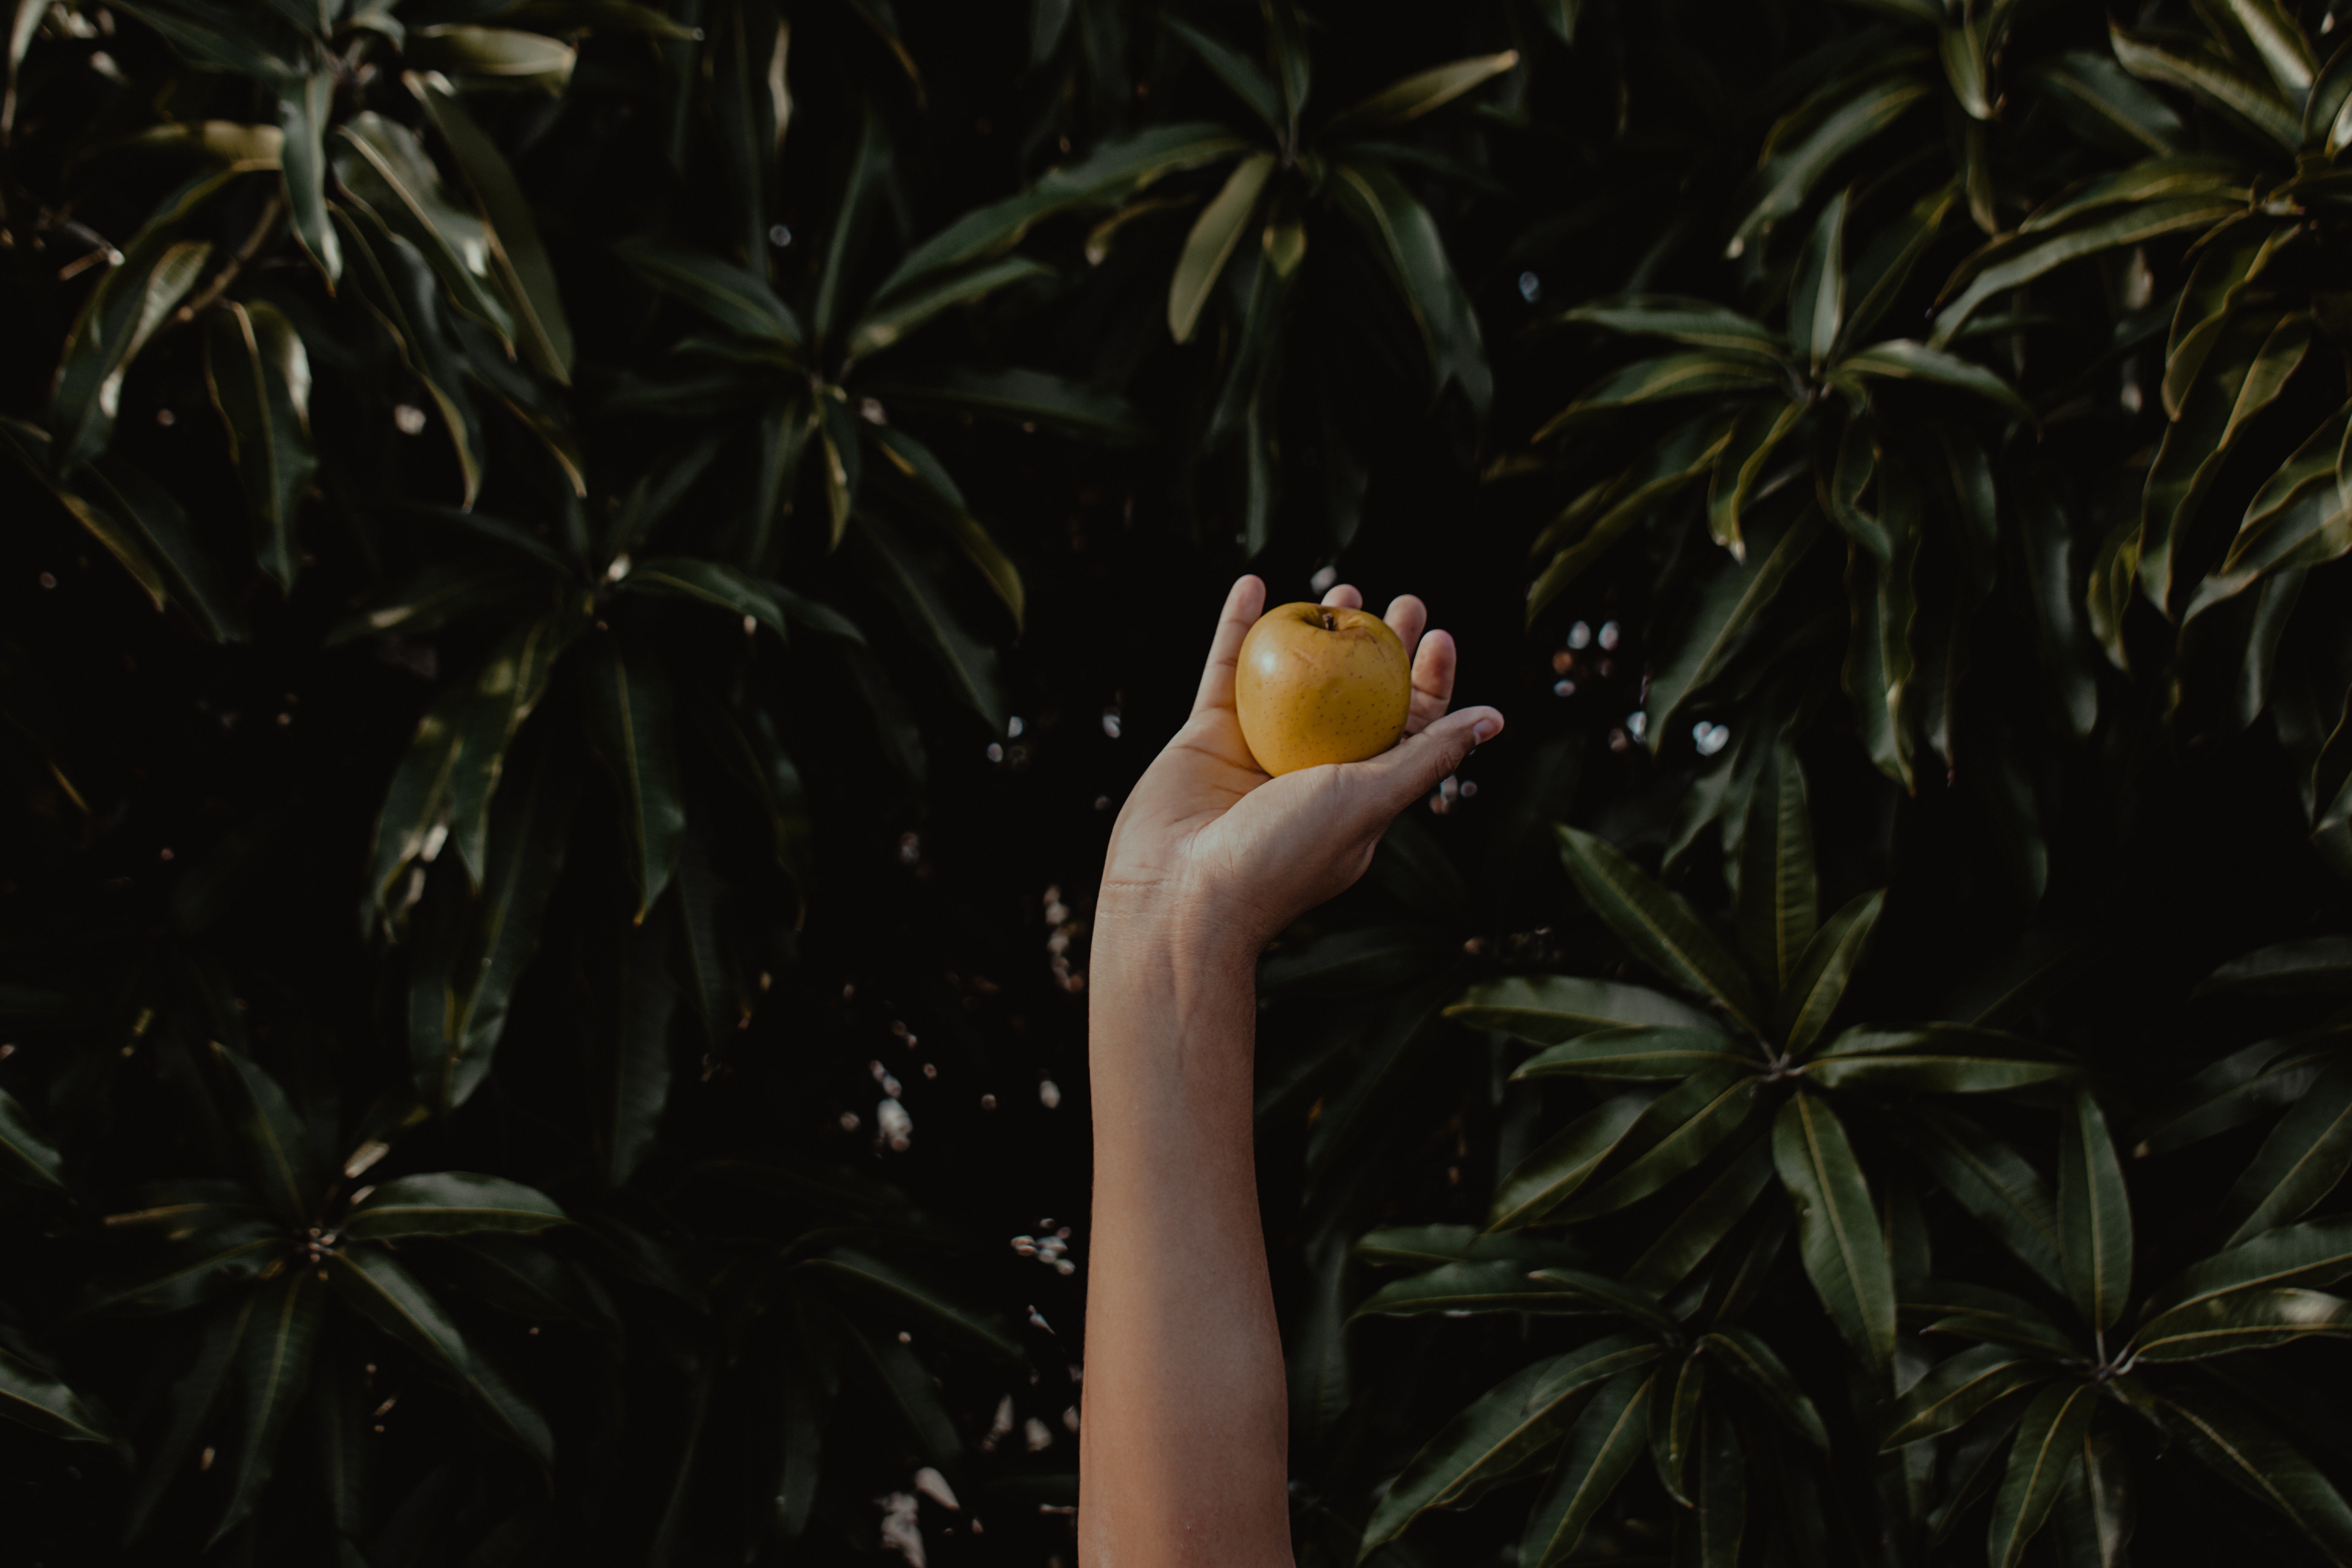 A person holding a yellow apple in front of green plants